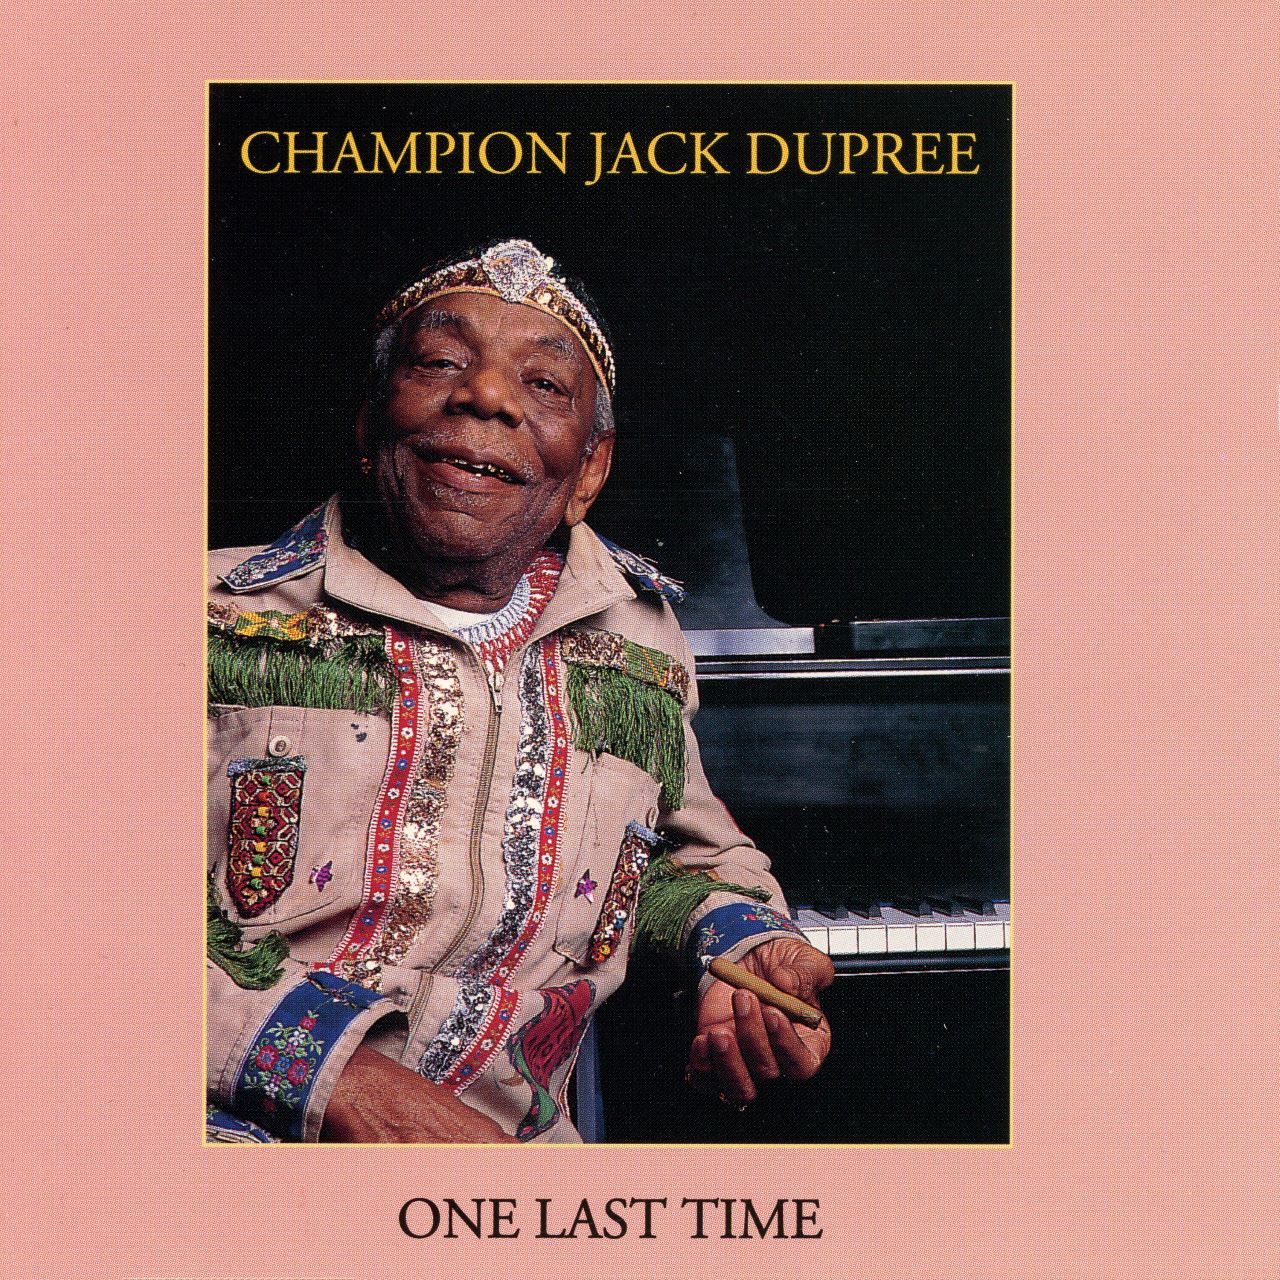 Champion Jack Dupree – One Last Time cover album